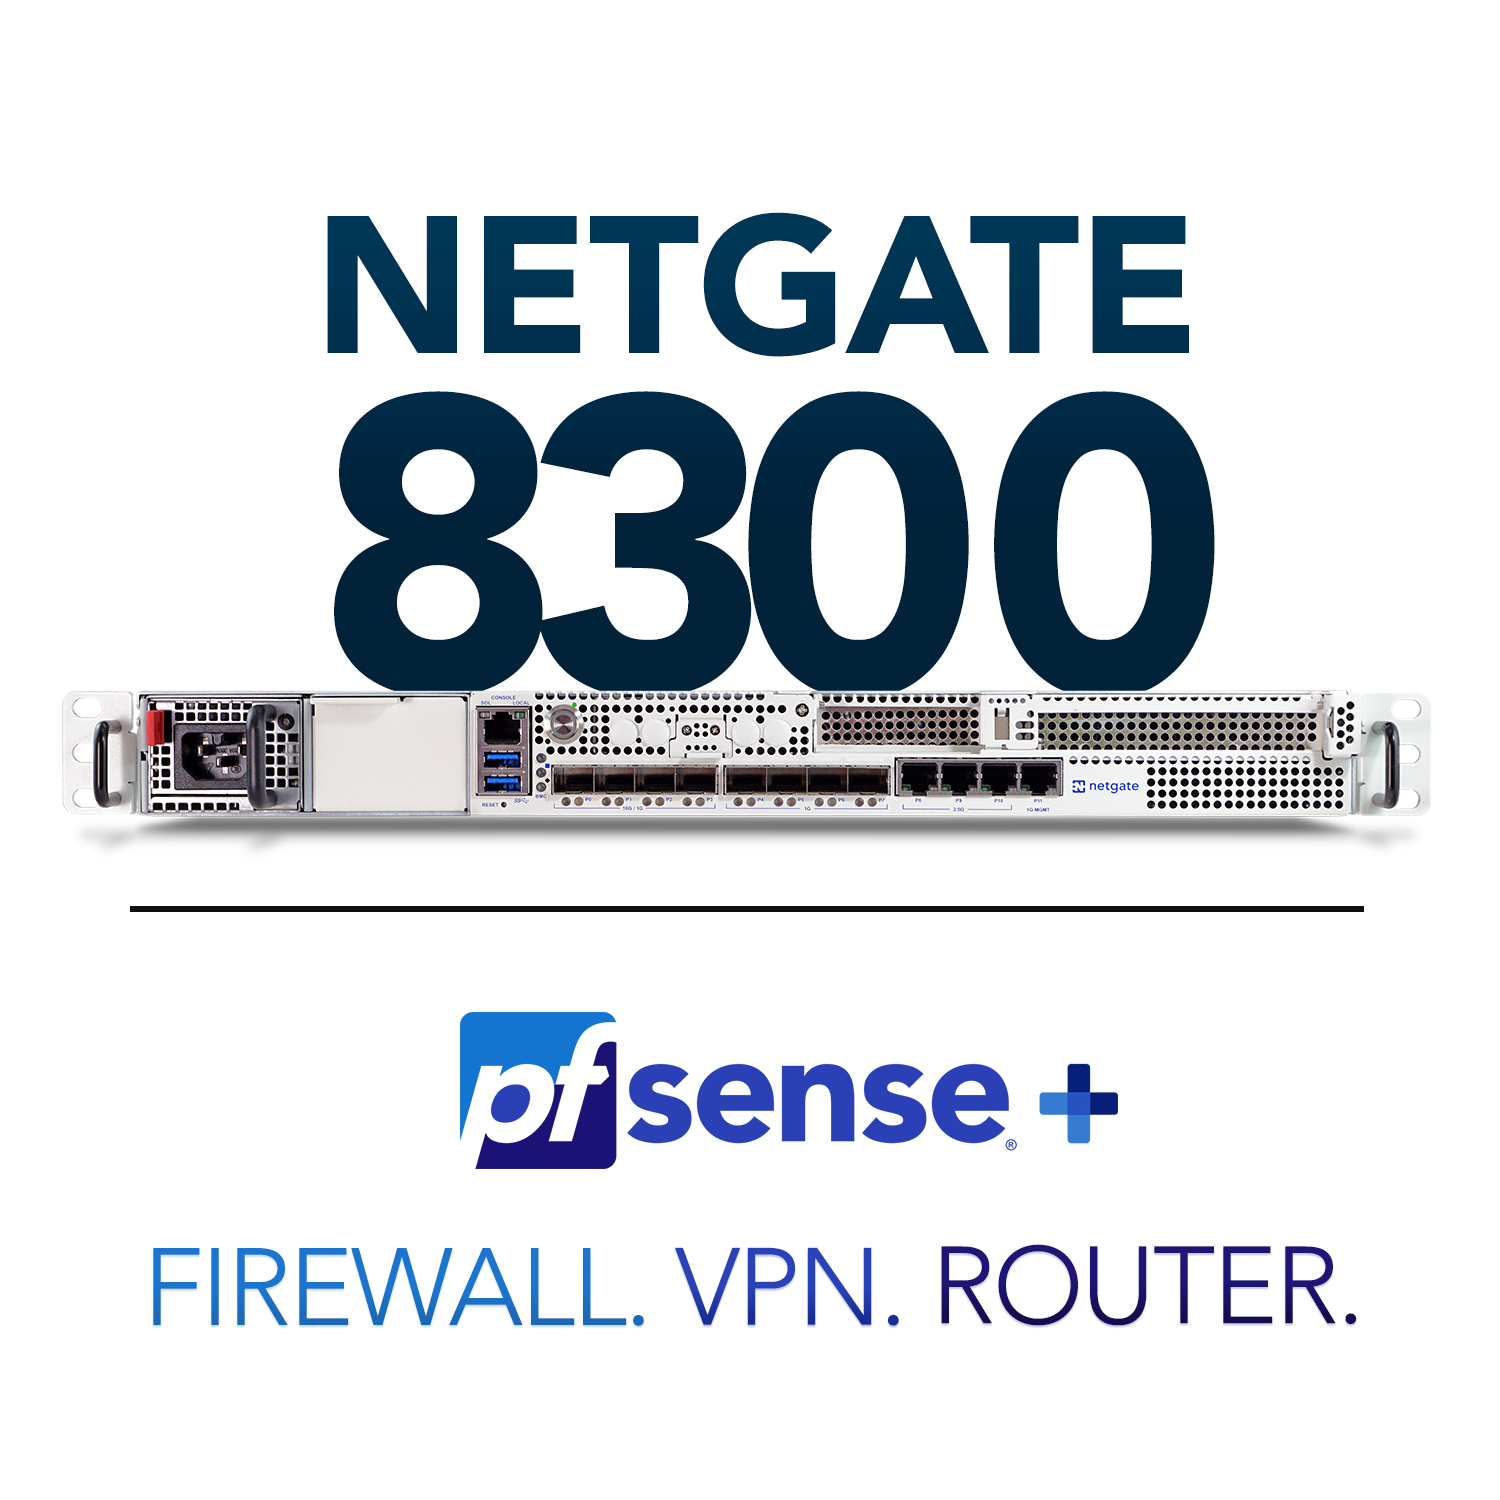 Introducing the Netgate 8300: Your Security Gateway for Performance and Expandability